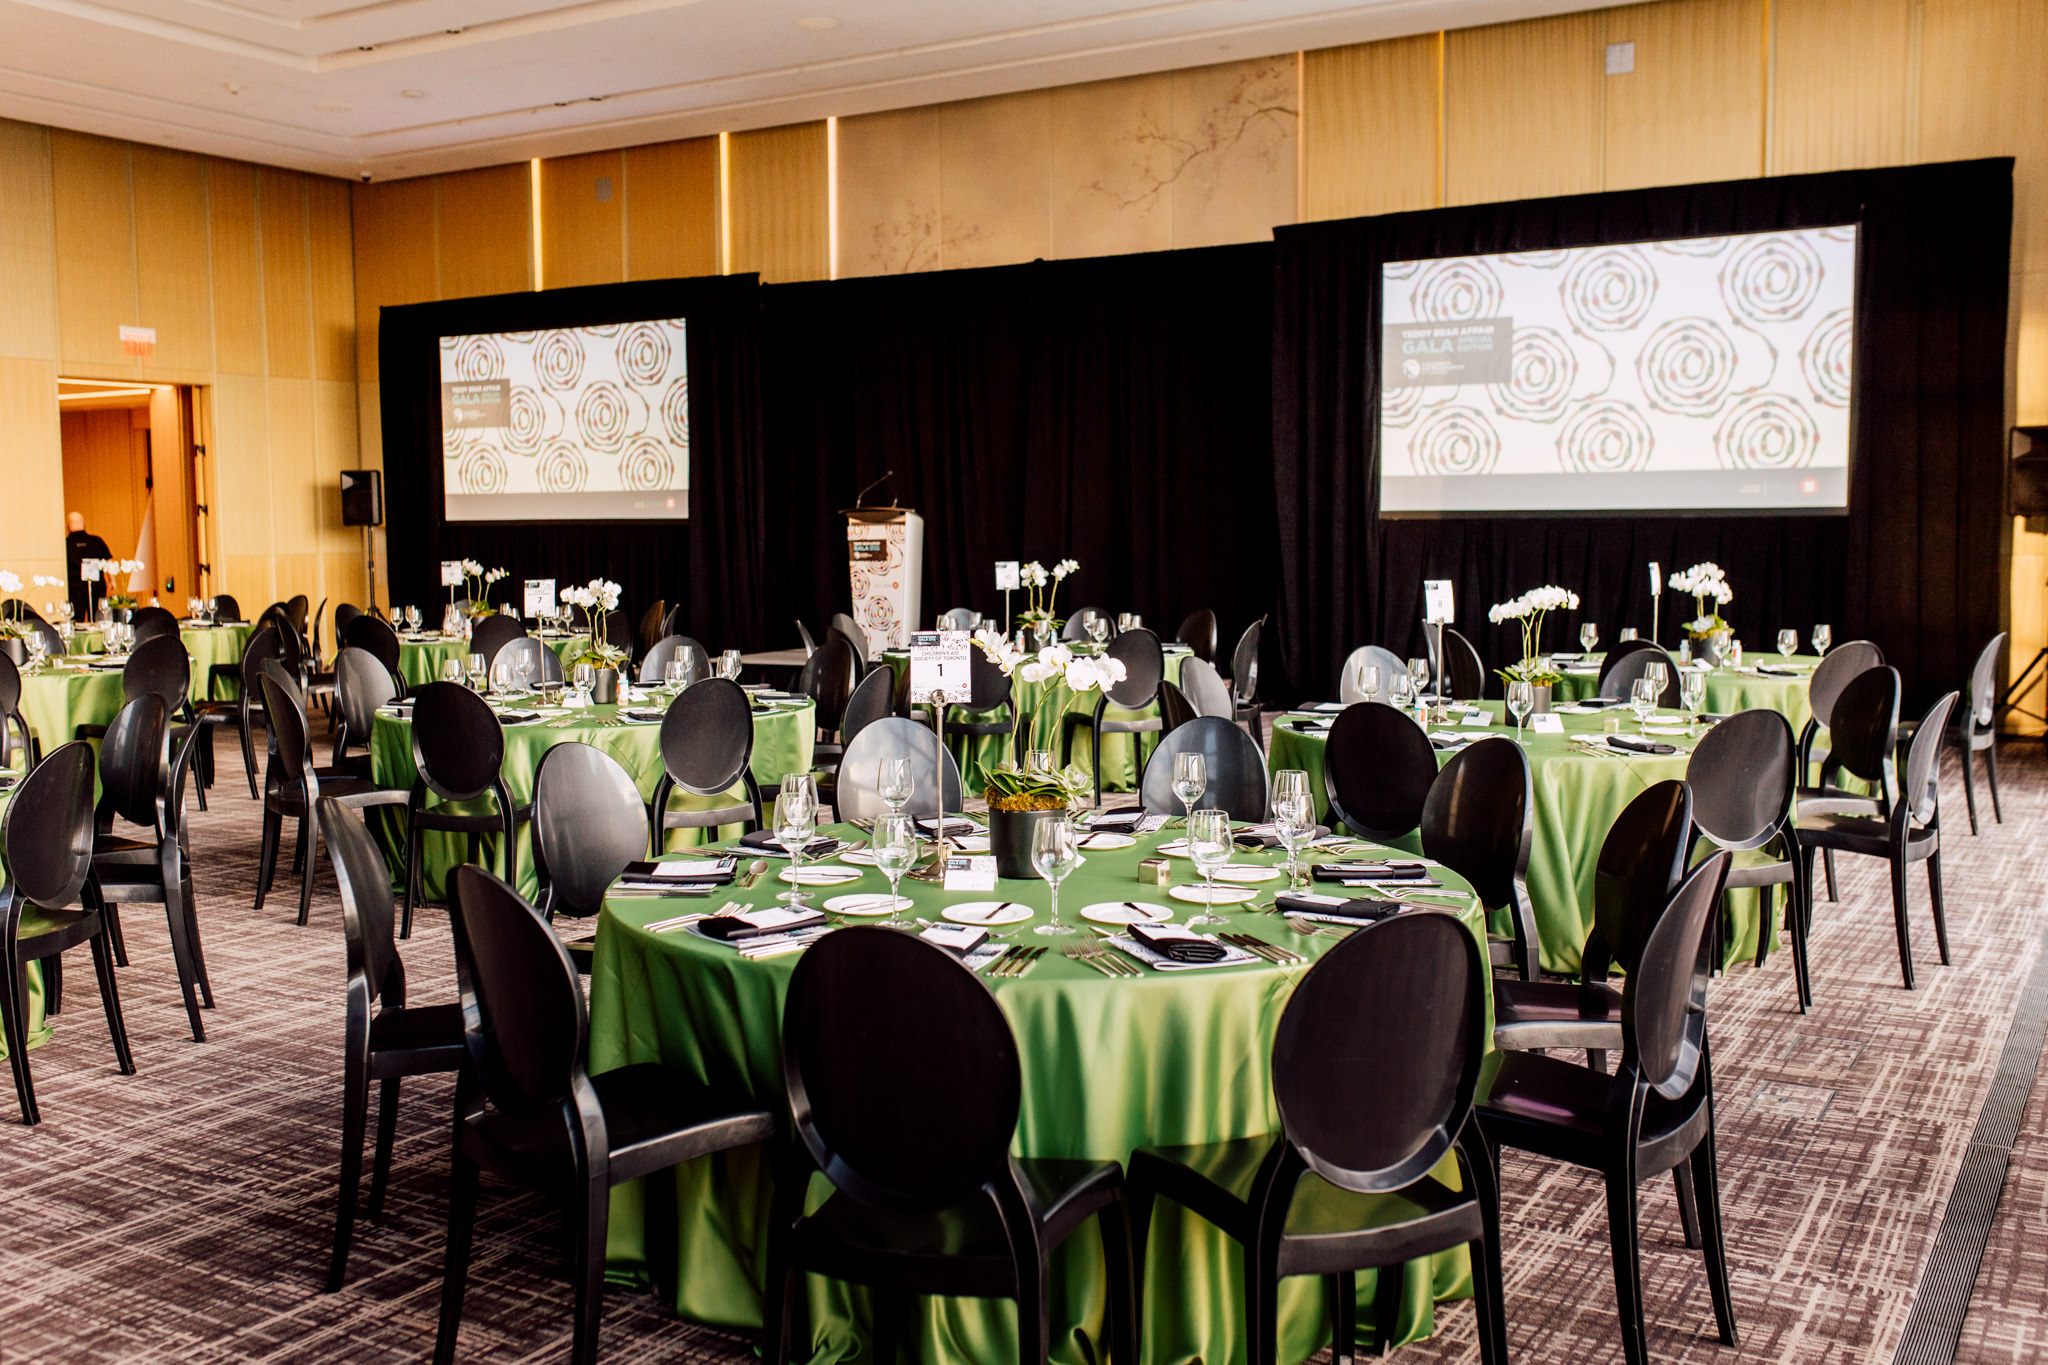 A banquet room with black and green decor.